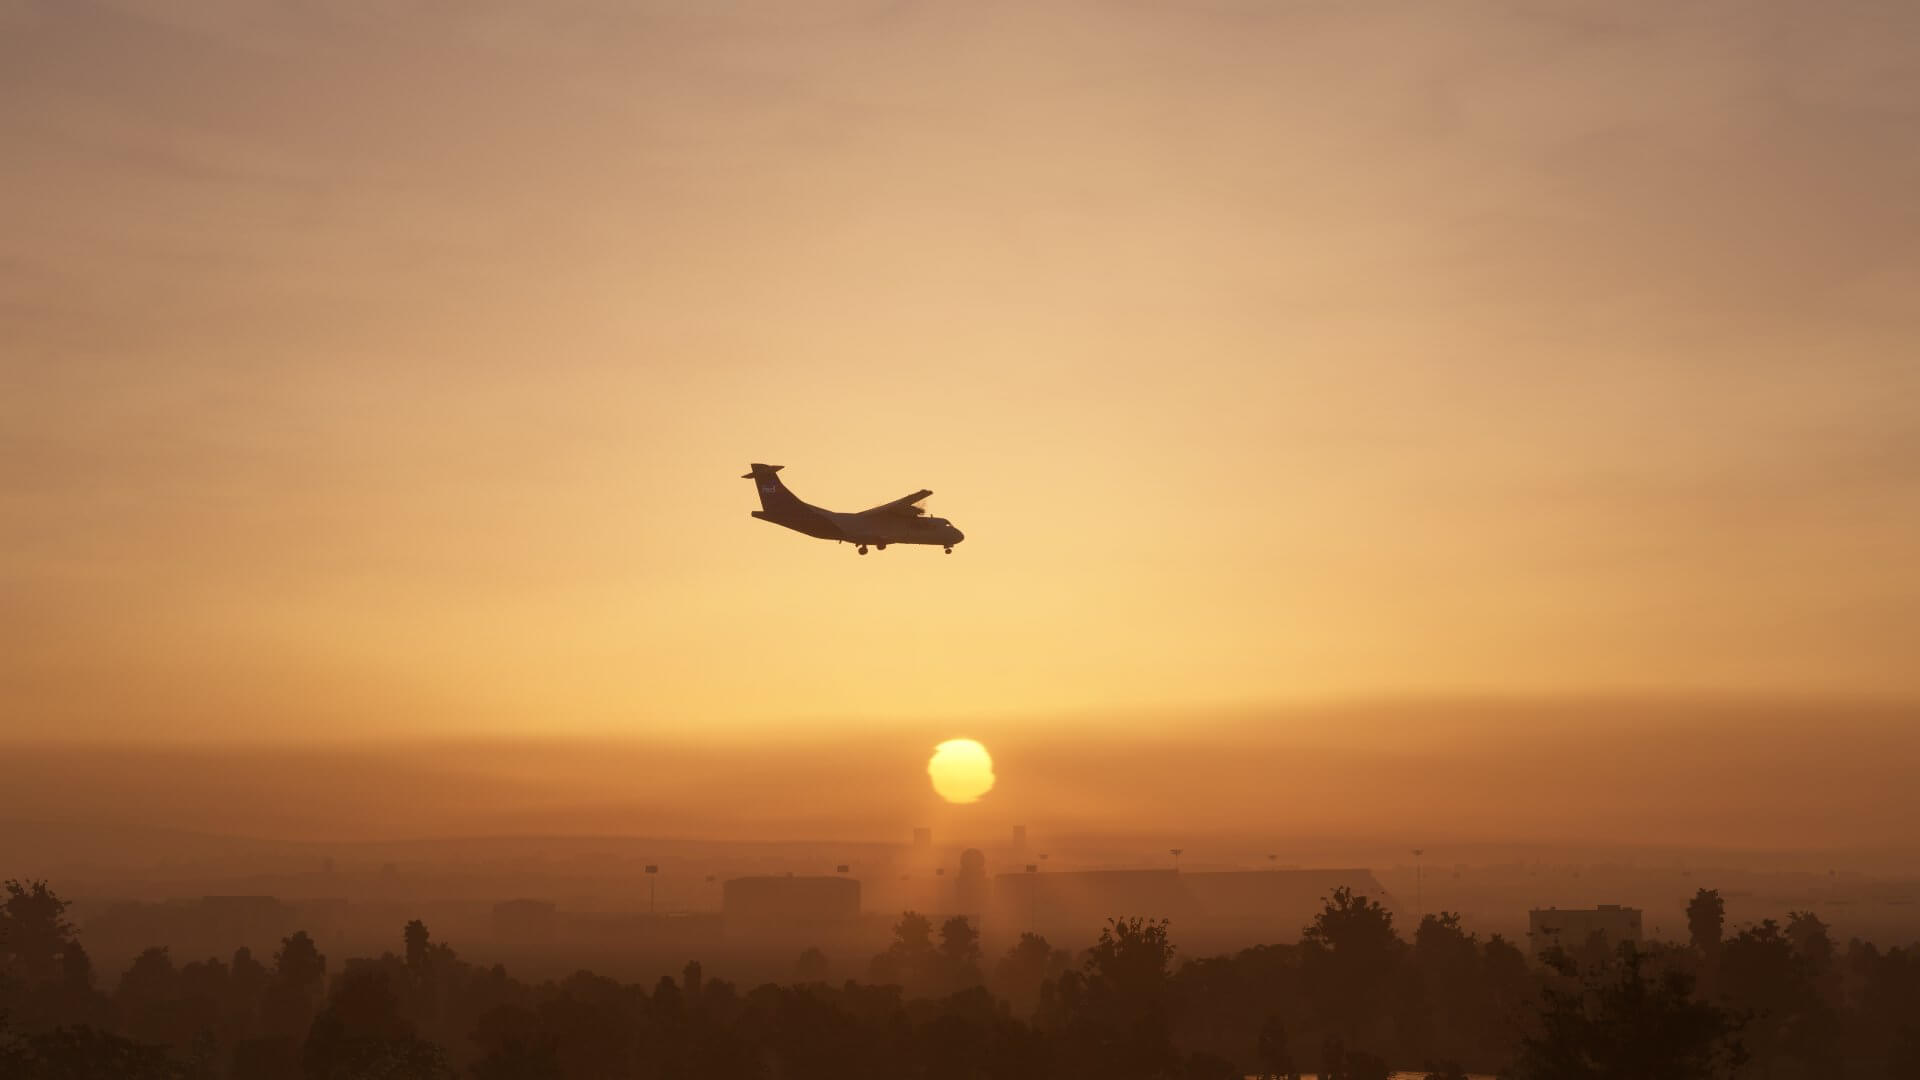 A FedEx ATR Cargo turboprop on approach with its landing gear down, and the sun setting behind it